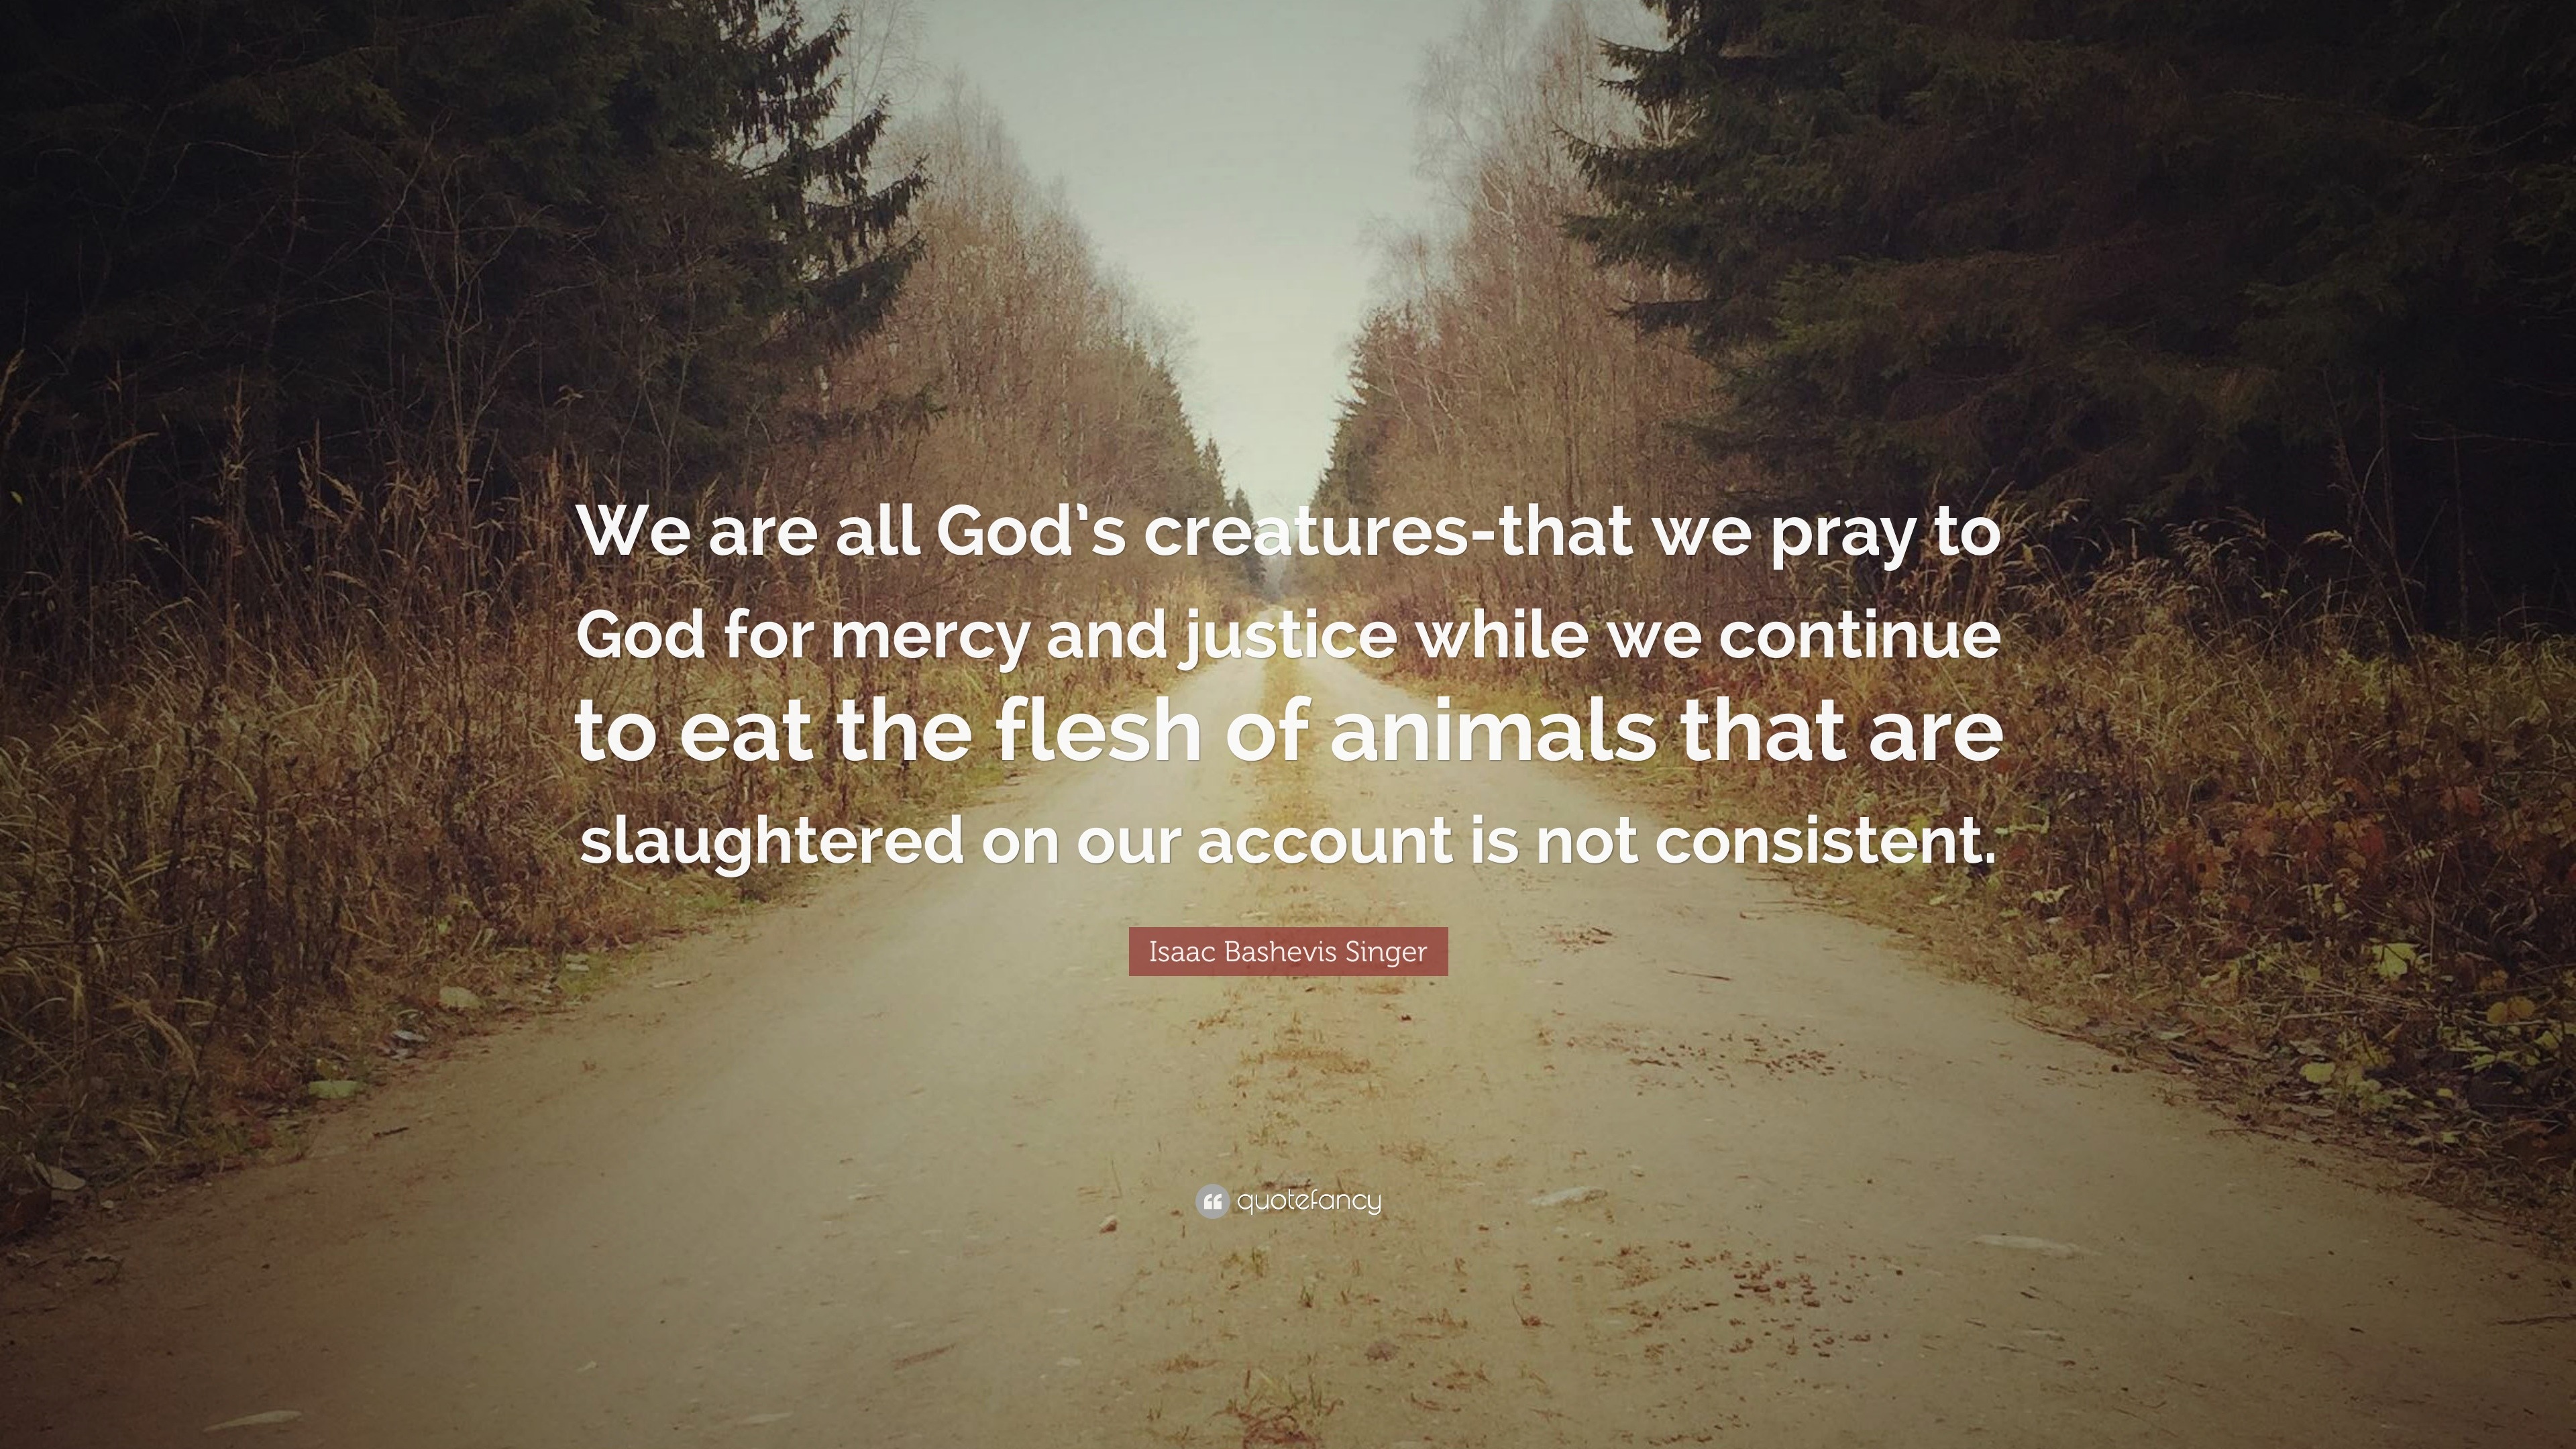 Isaac Bashevis Singer Quote: “We are all God's creatures-that we pray to God  for mercy and justice while we continue to eat the flesh of animals that  ...”